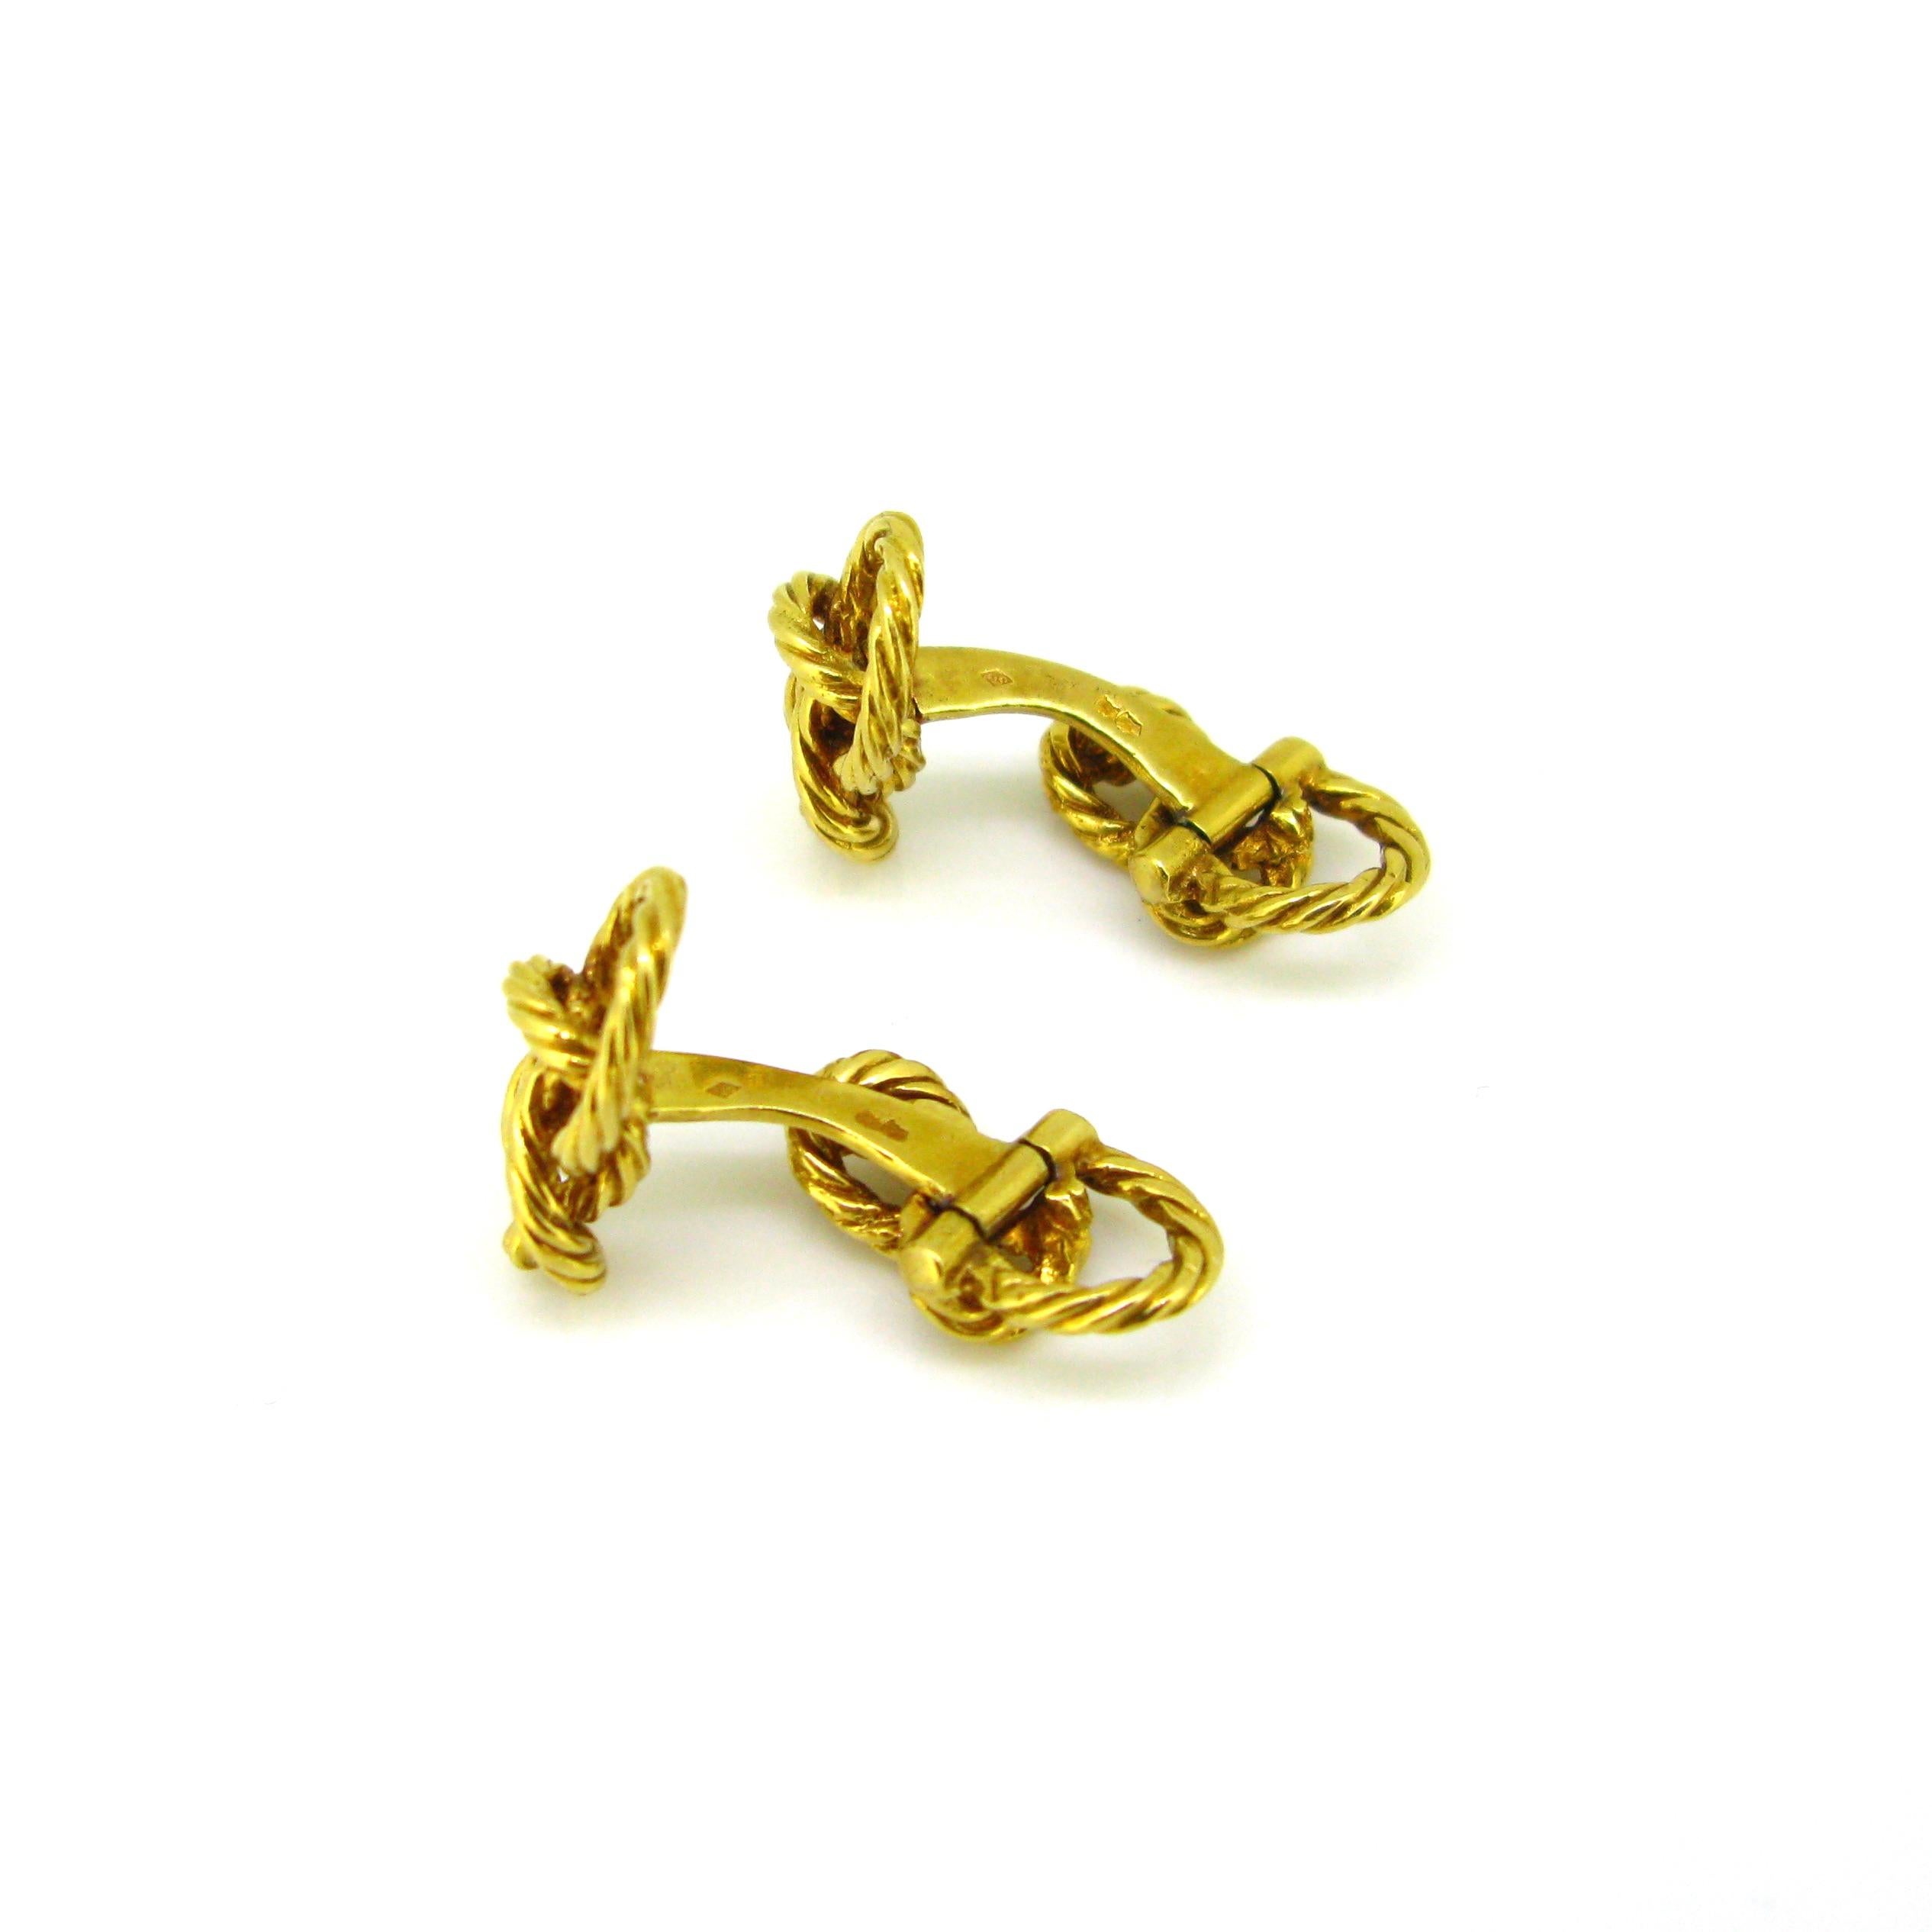 Vintage French 18kt Gold Knot Cufflinks by De Percin, circa 1960 2